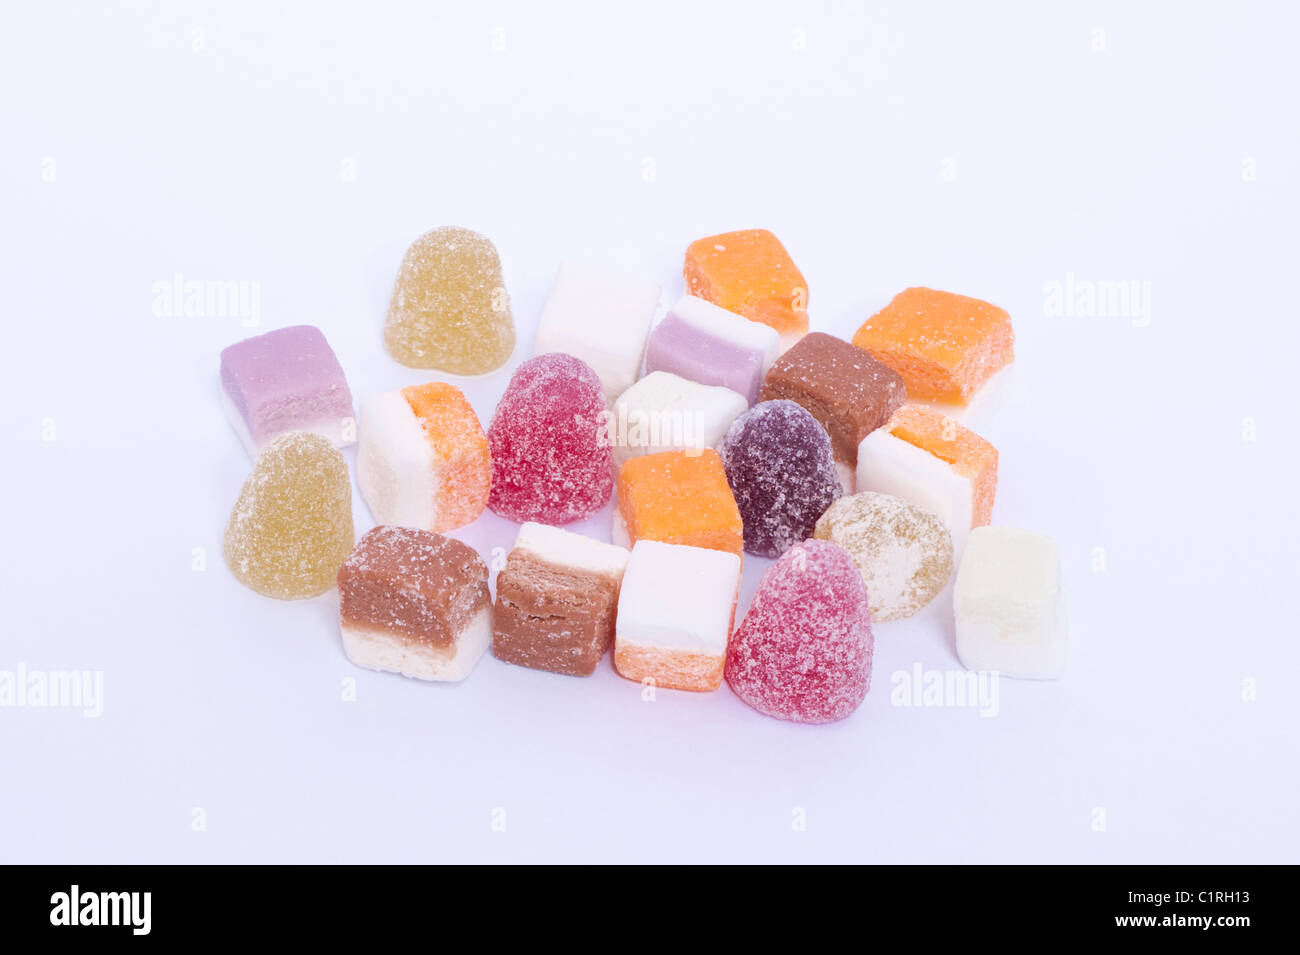 A selection of dolly mixtures traditional sweets on a white background Stock Photo